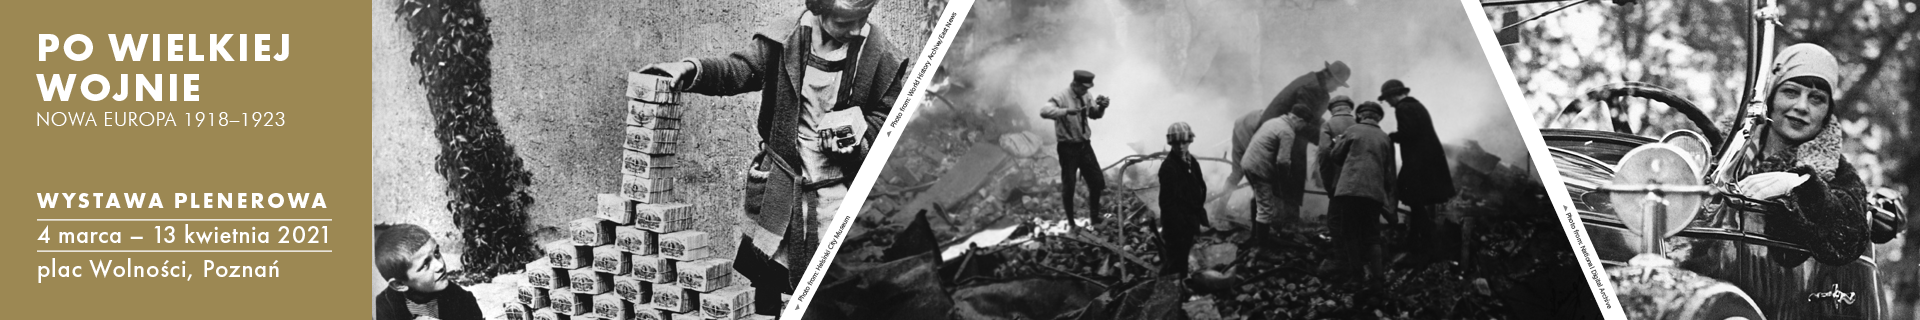 cover image of After the Great War goes to Poznań project